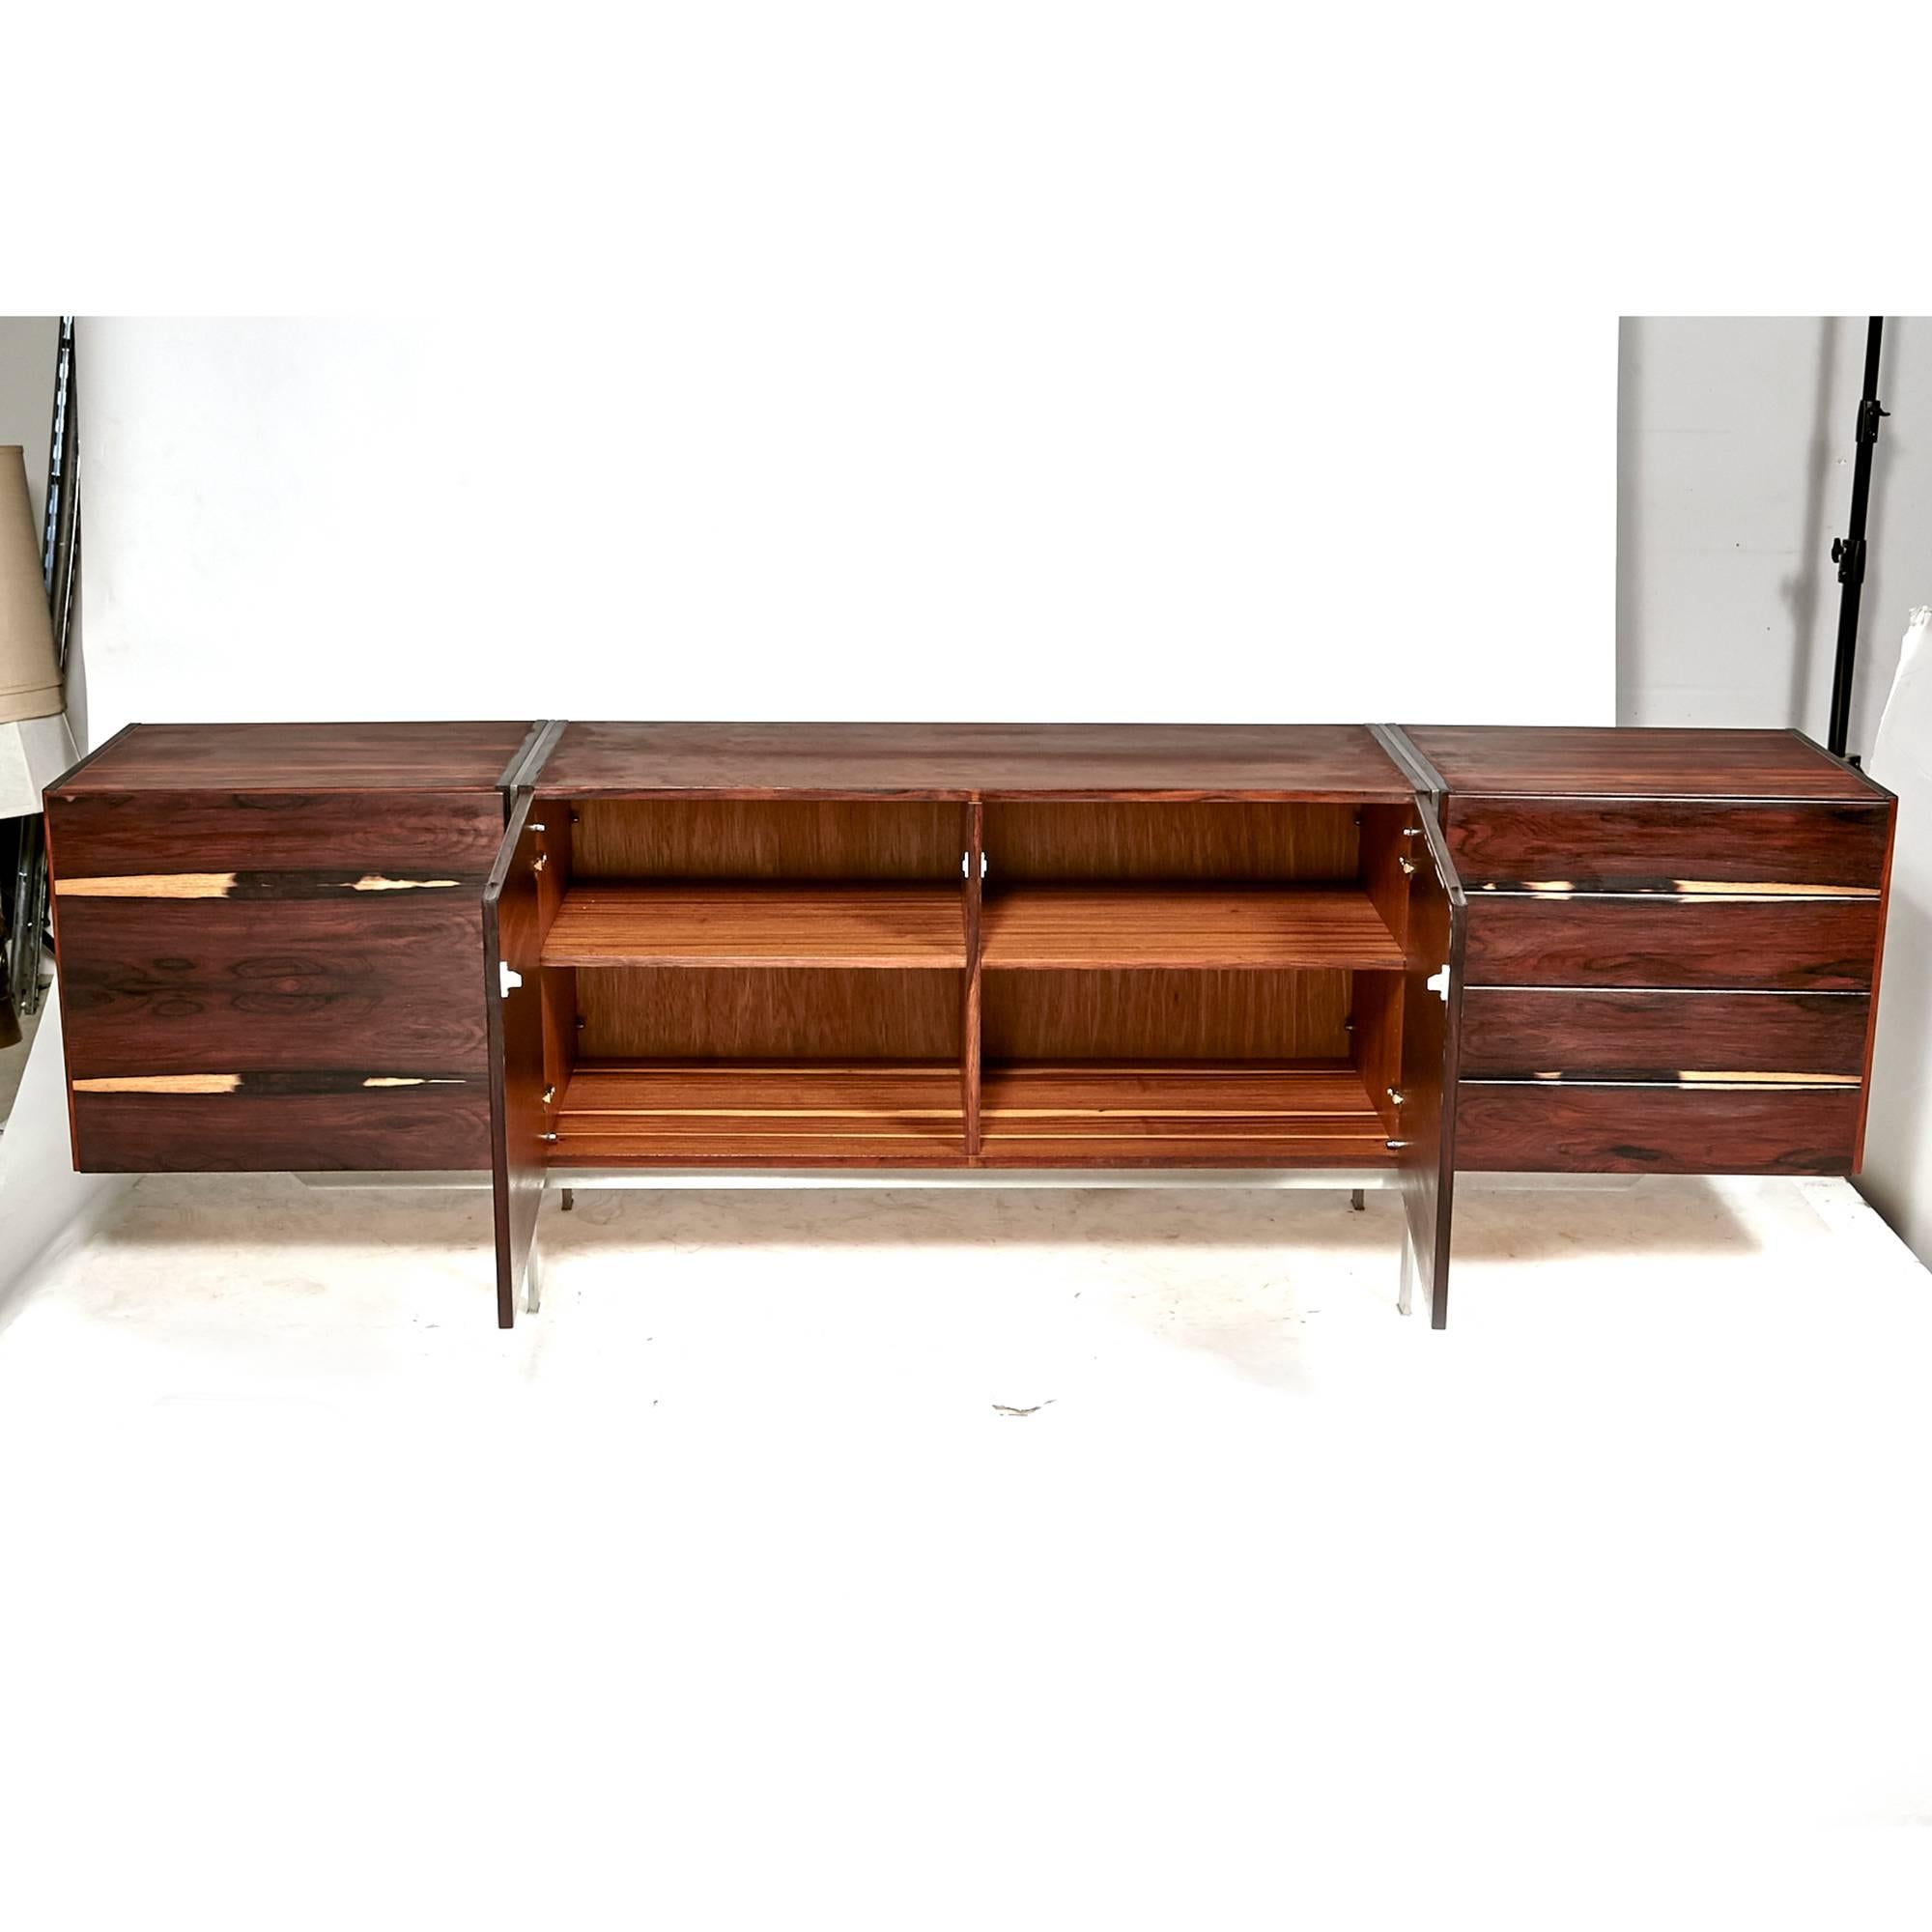 Danish Ib Kofod-Larsen Rosewood and Steel Low Sideboard, 1960s In Excellent Condition For Sale In Amherst, NH